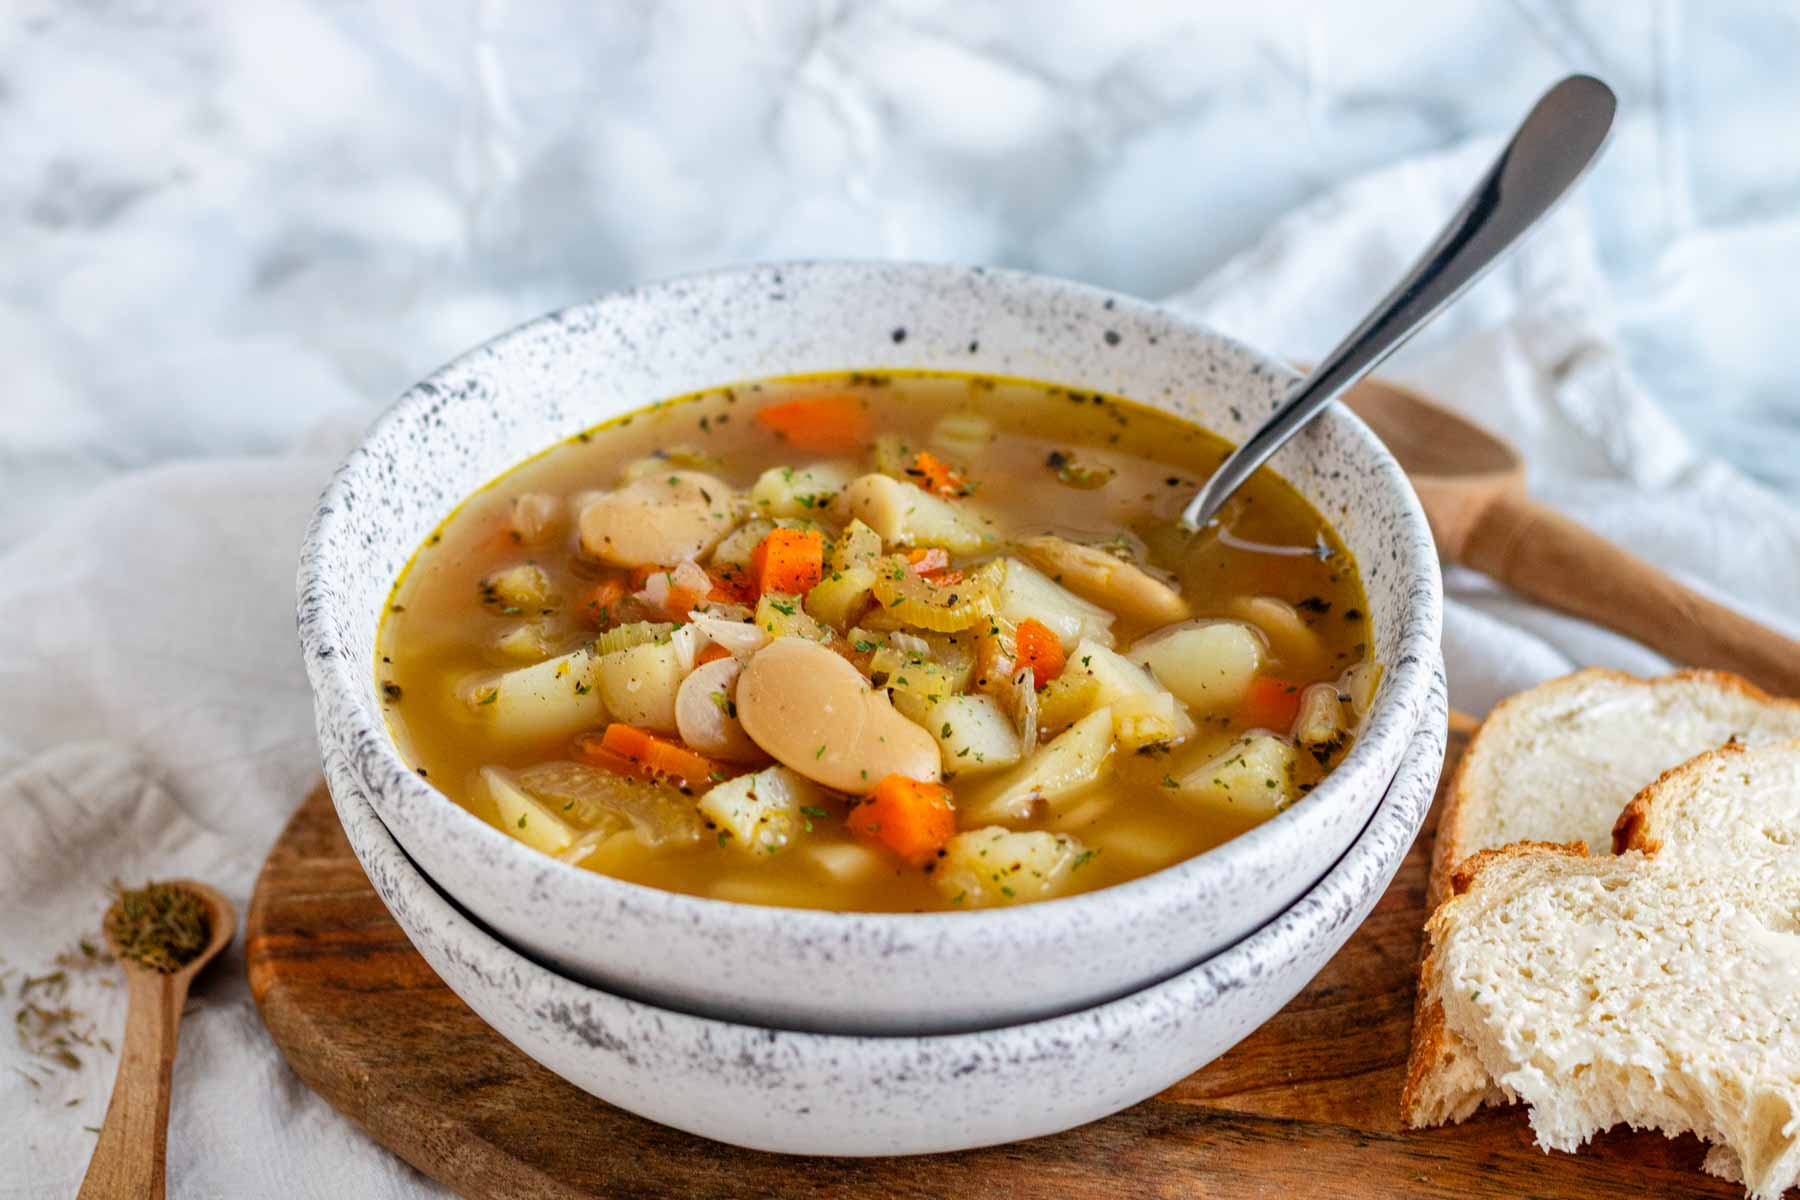 A bowl of lima bean soup with a spoon and bread.